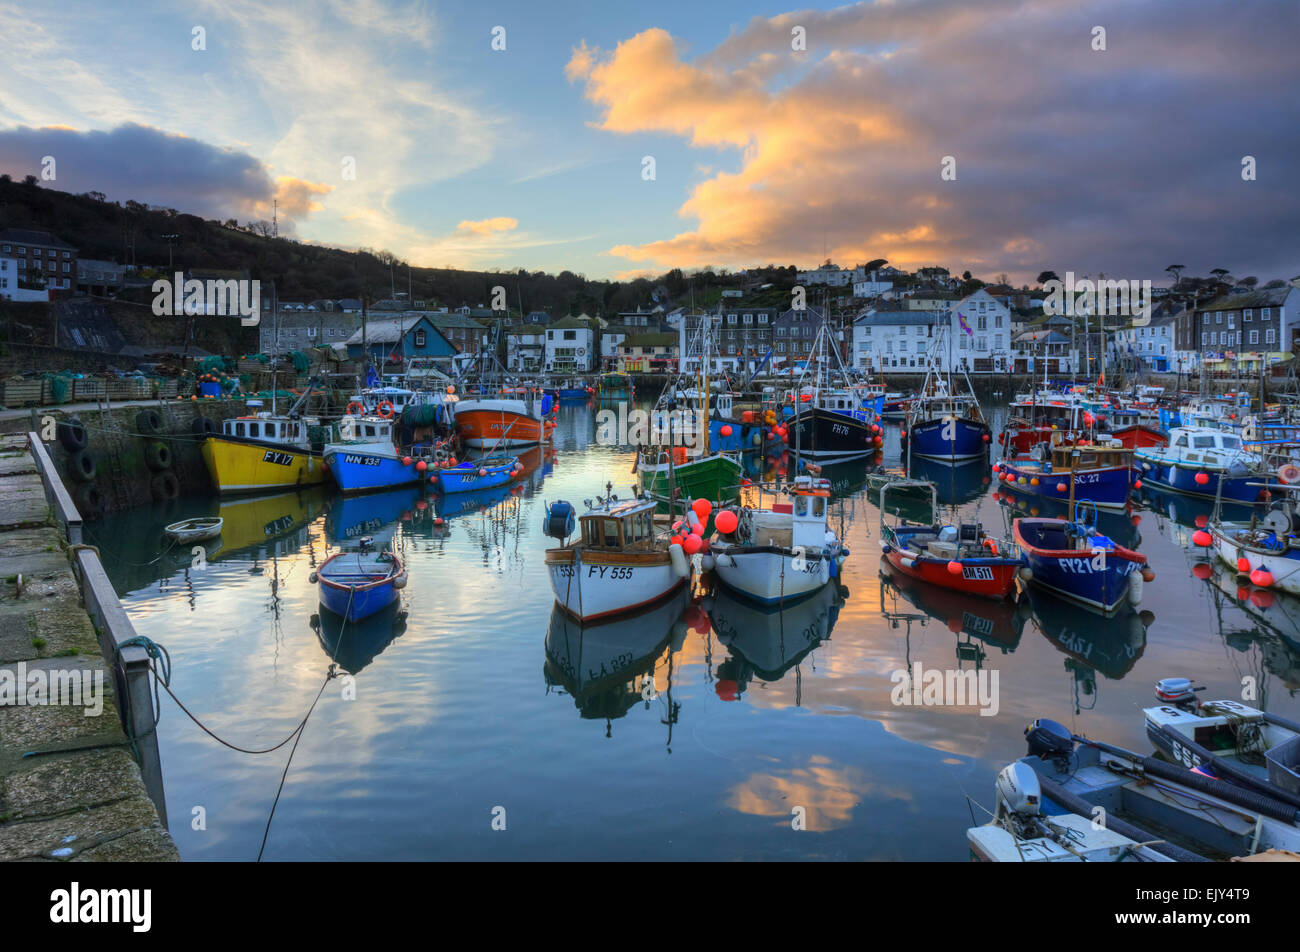 Boats in the inner harbour at Mevagissey on the south coast of Cornwall, captured at sunset. Stock Photo